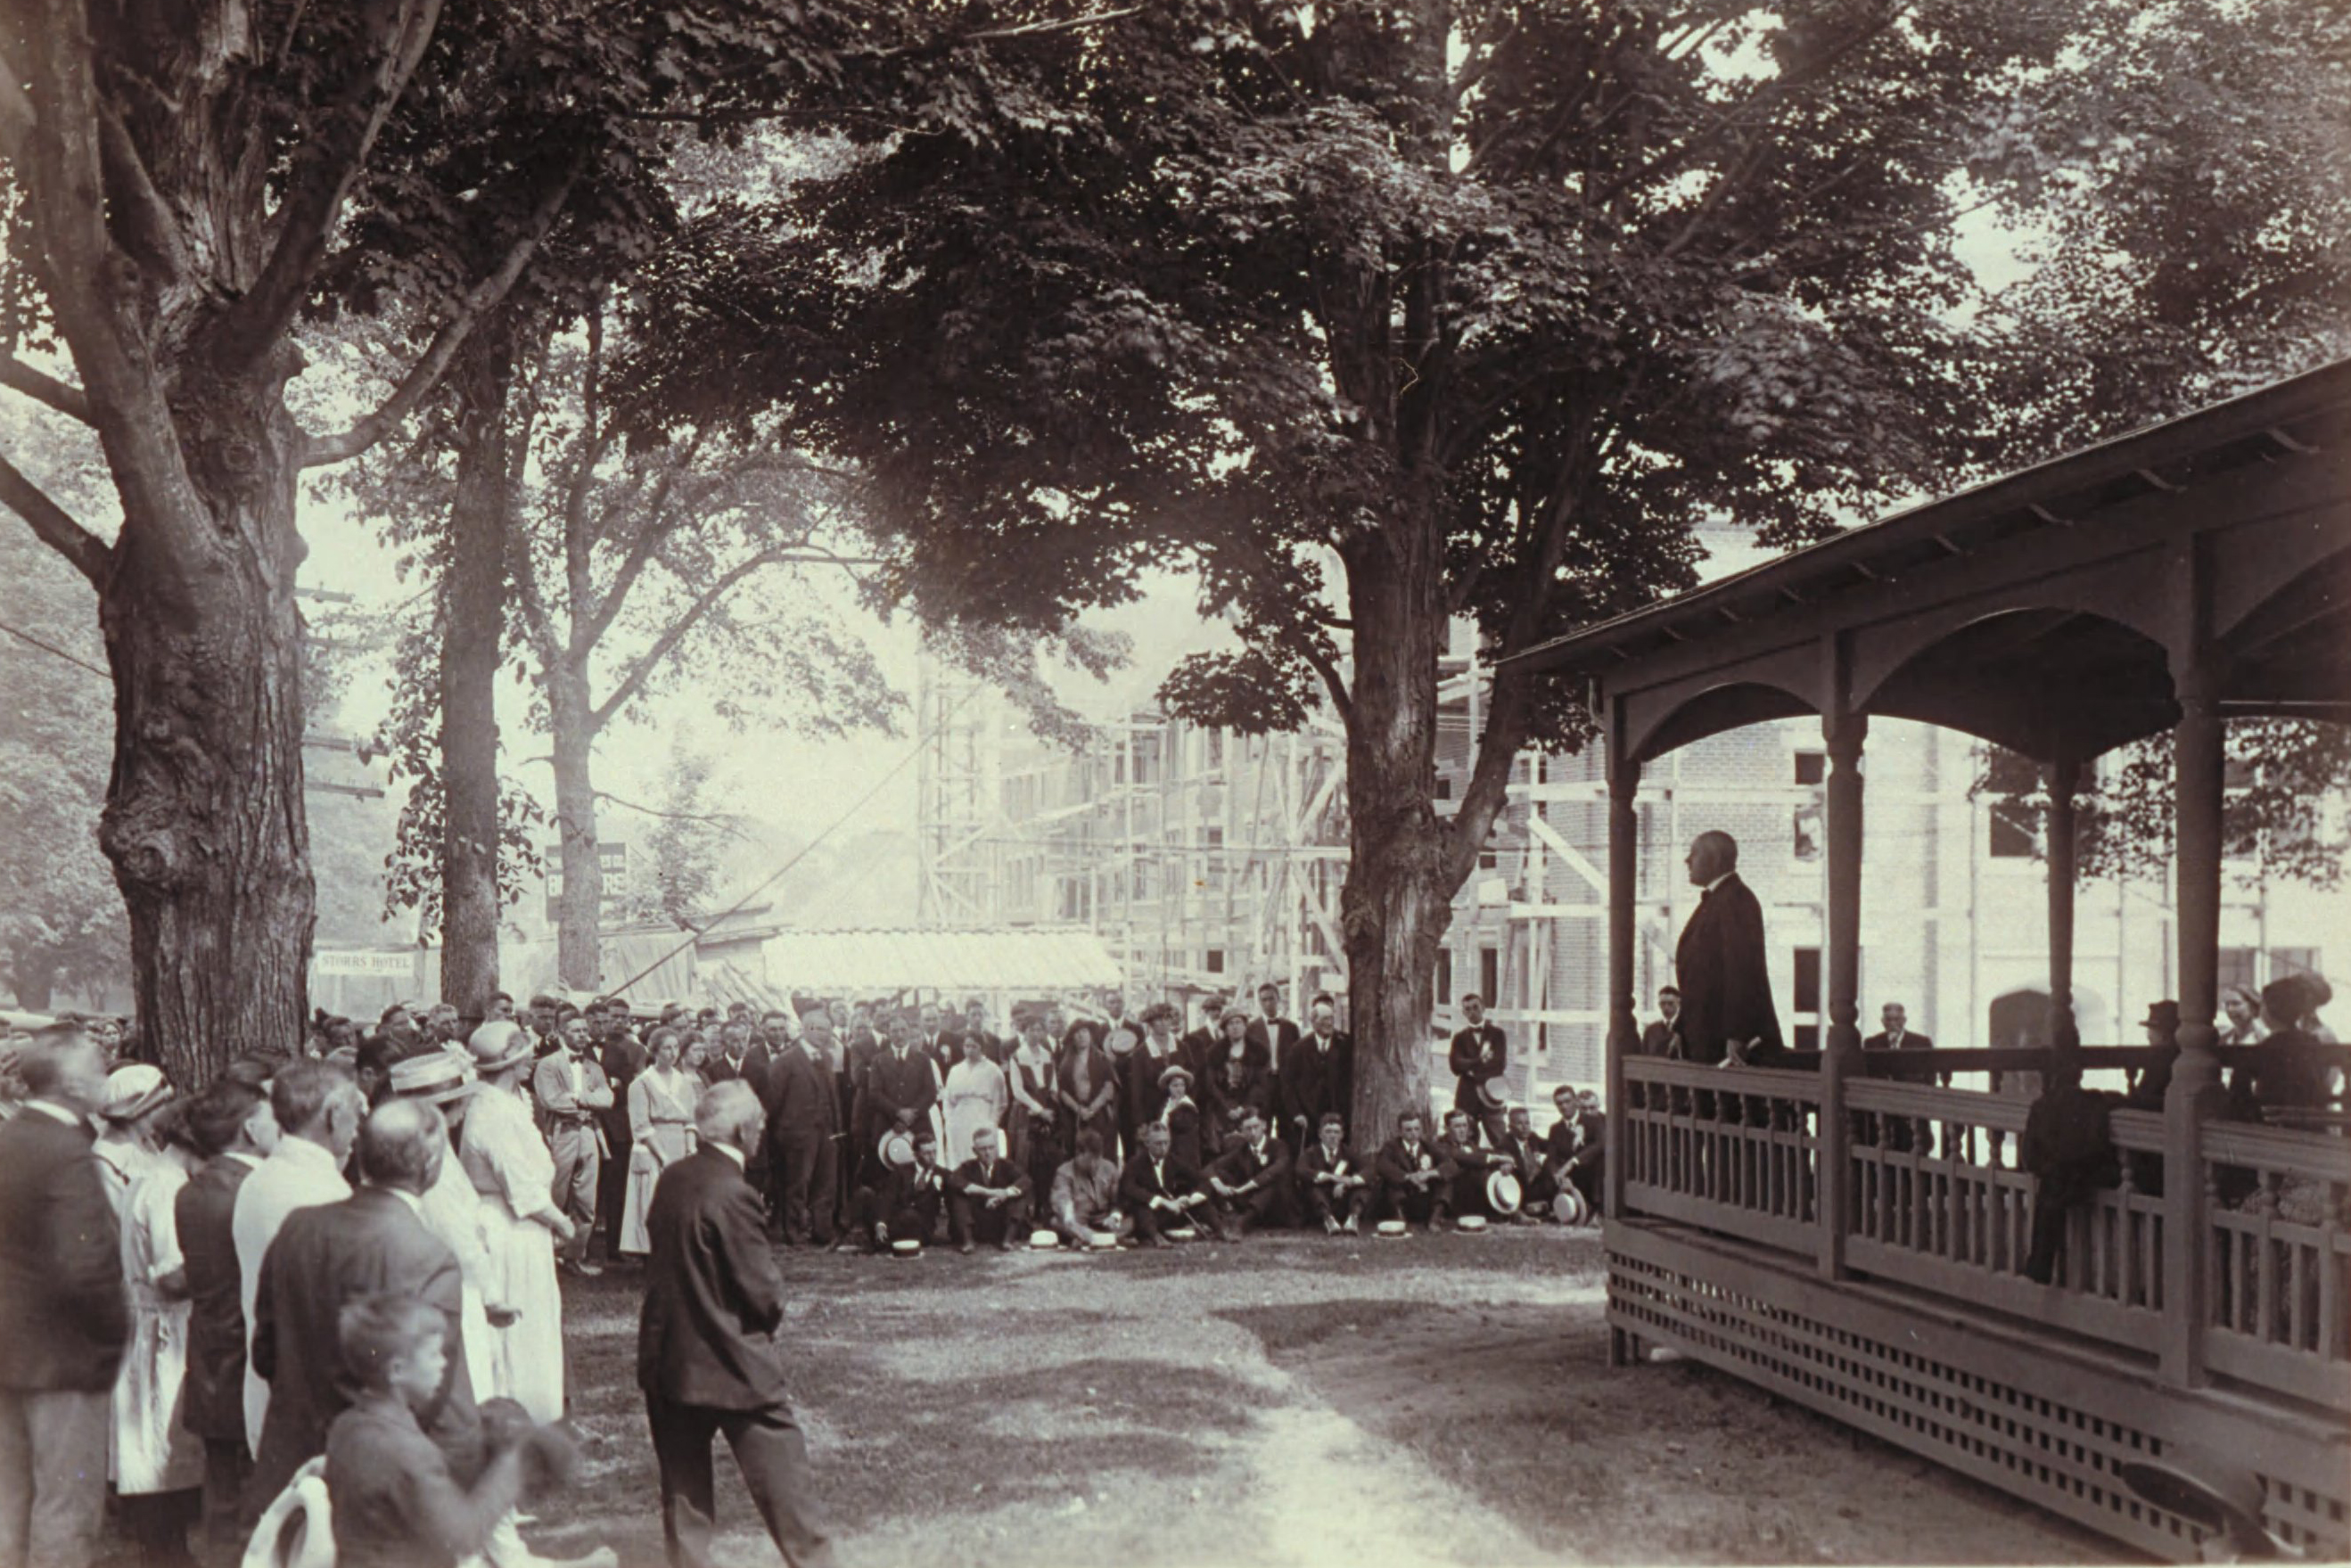 Holcomb Hall Dedication, Connecticut Agricultural College. (Archives & Special Collections, UConn Library)